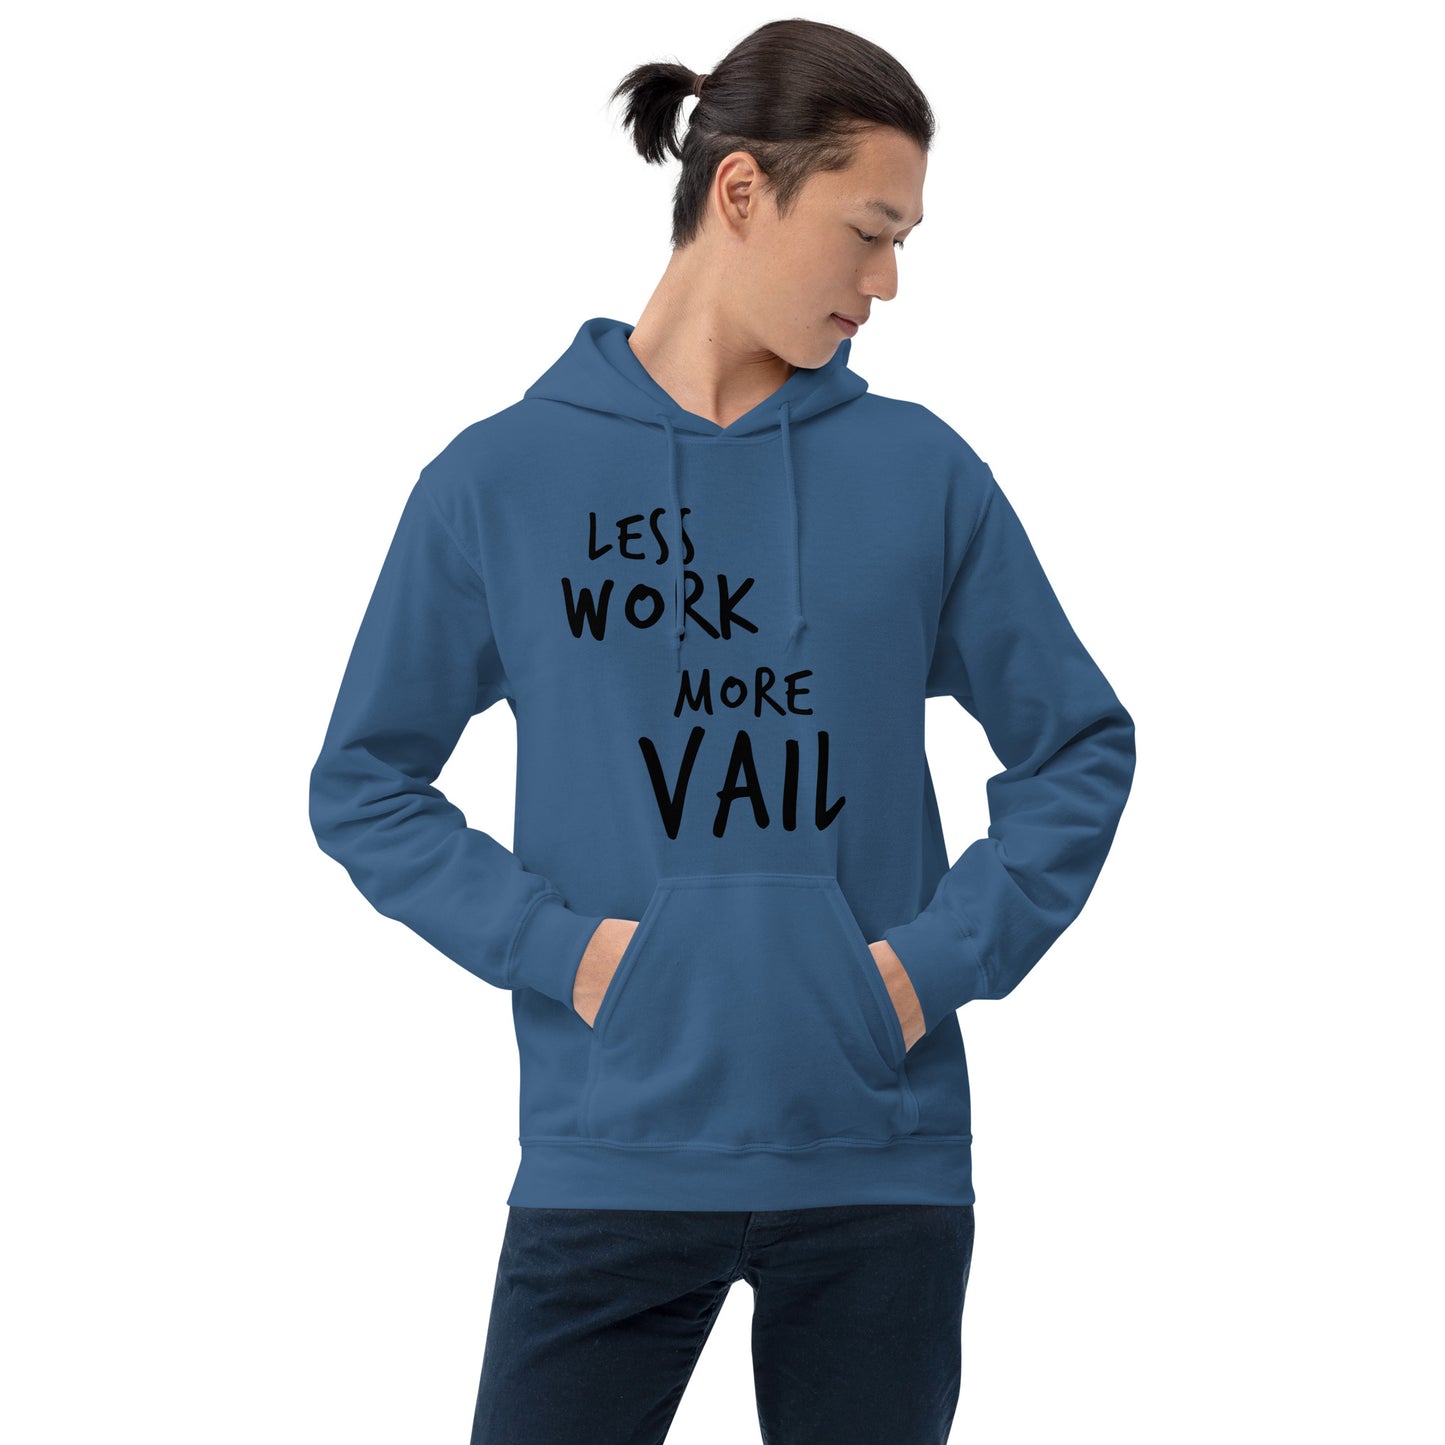 Less Work More Vail™ Mountain Unisex Hoodie